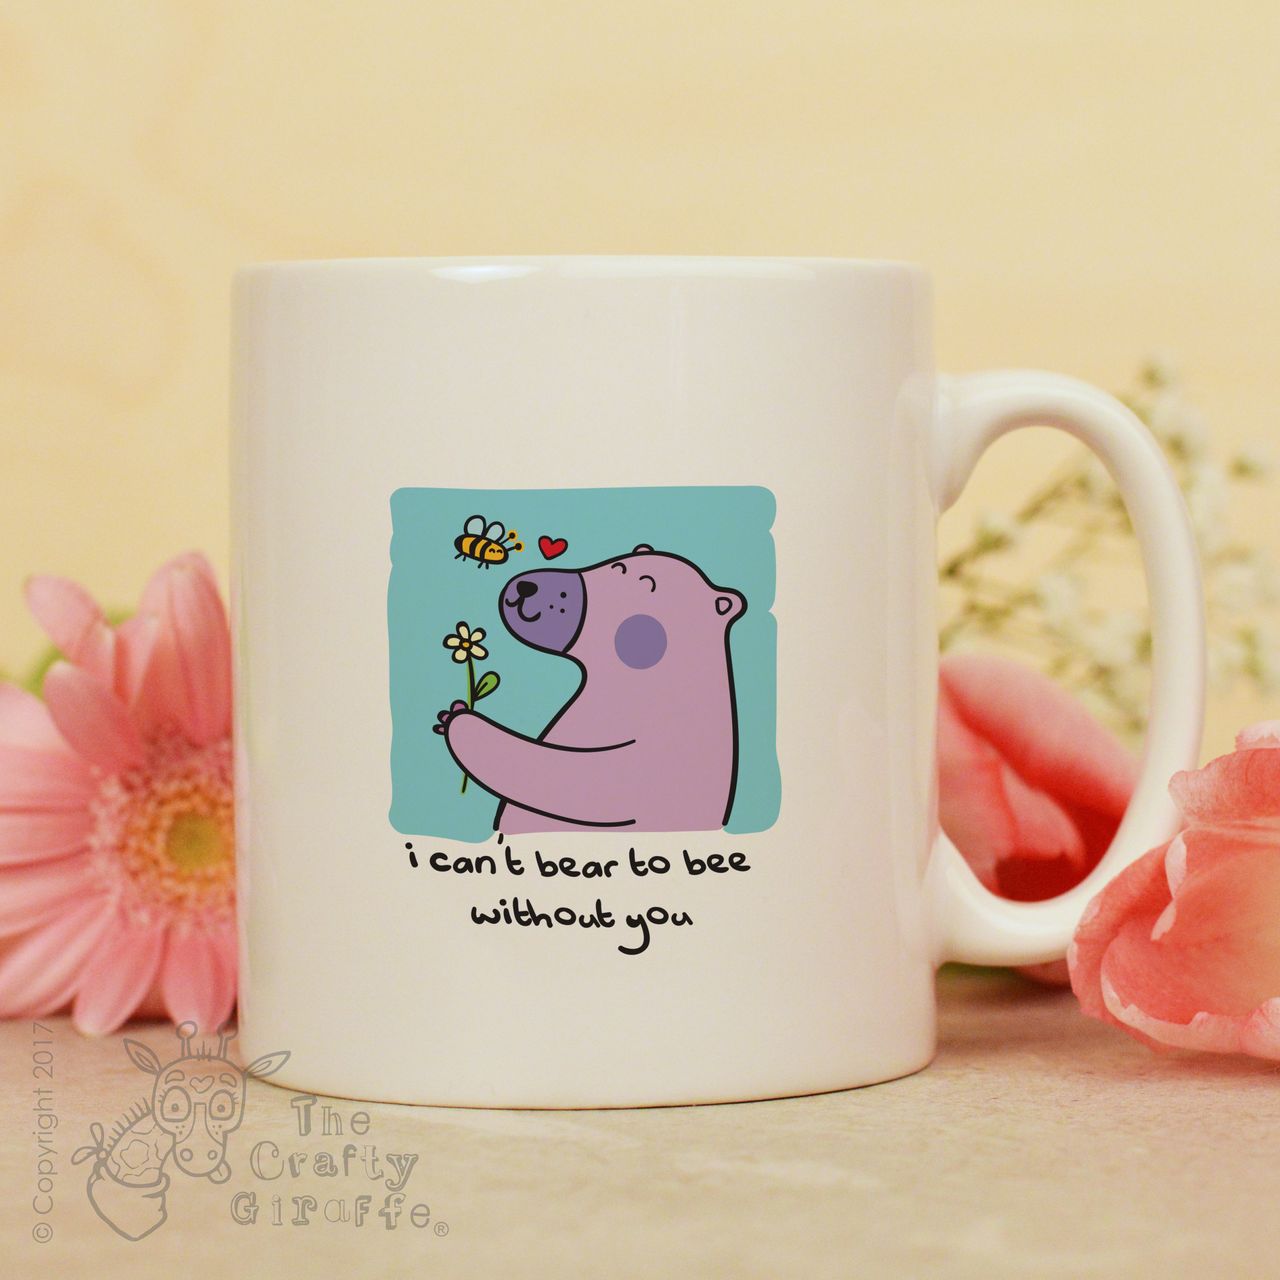 I can’t bear to bee without you mug